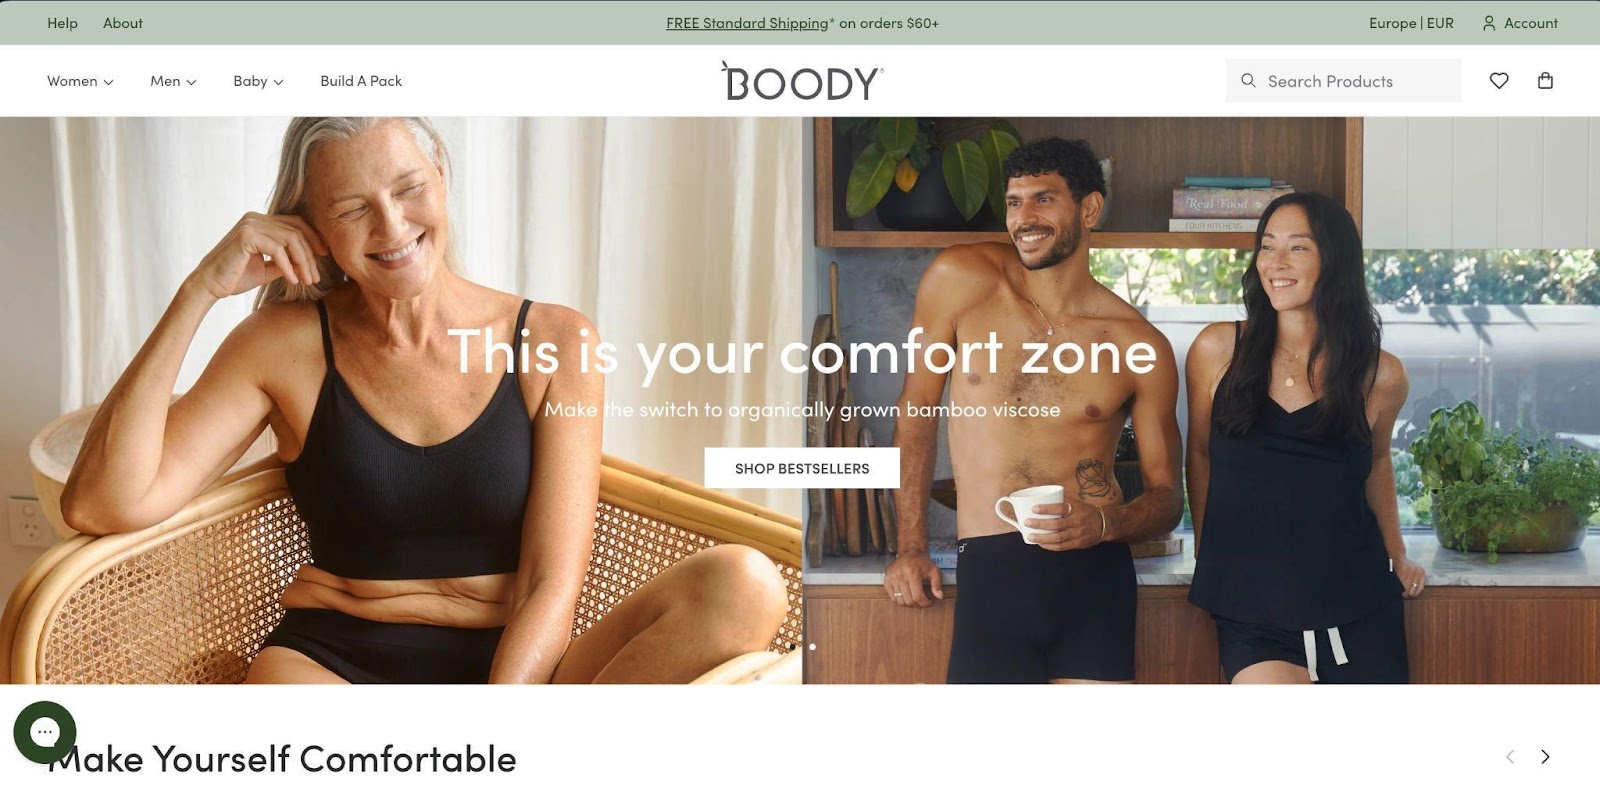 Boody tells a story of comfort with its soft colors, lively photography, and accompanying text.